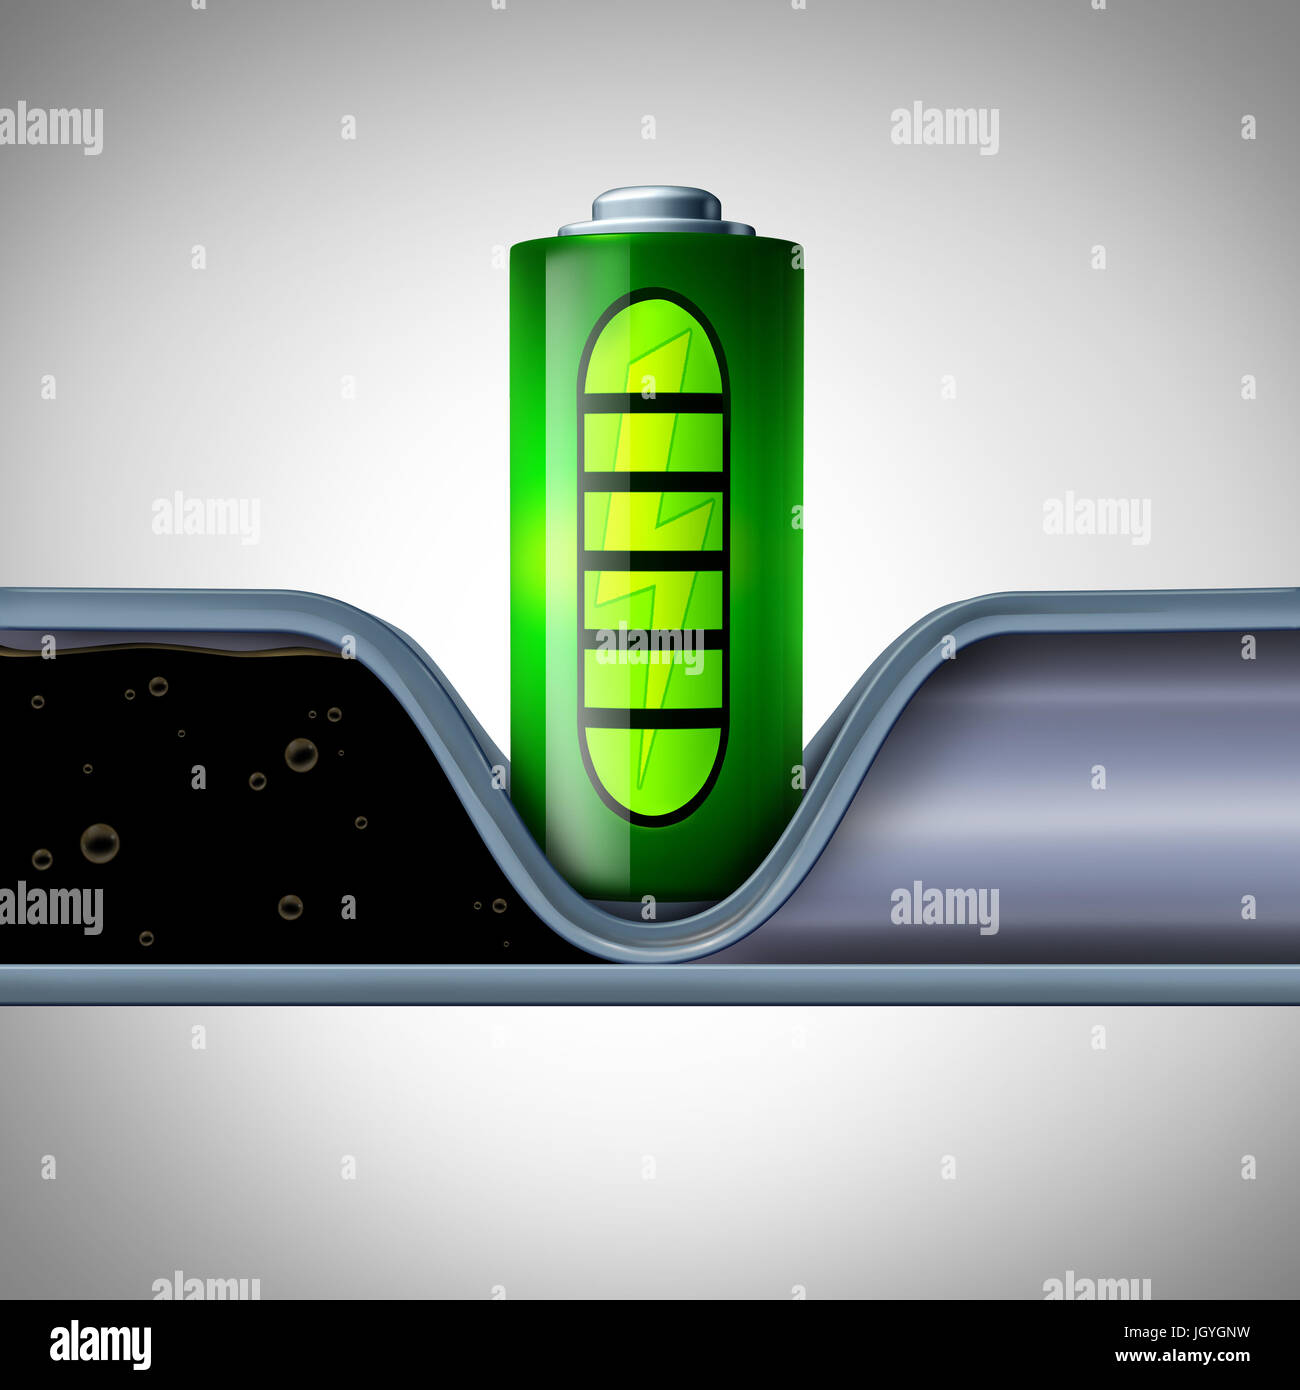 Battery technology disrupting oil industry and cutting fossil fuel concept as a electric batteries symbol blocking a petroleum or gasoline pipeline. Stock Photo